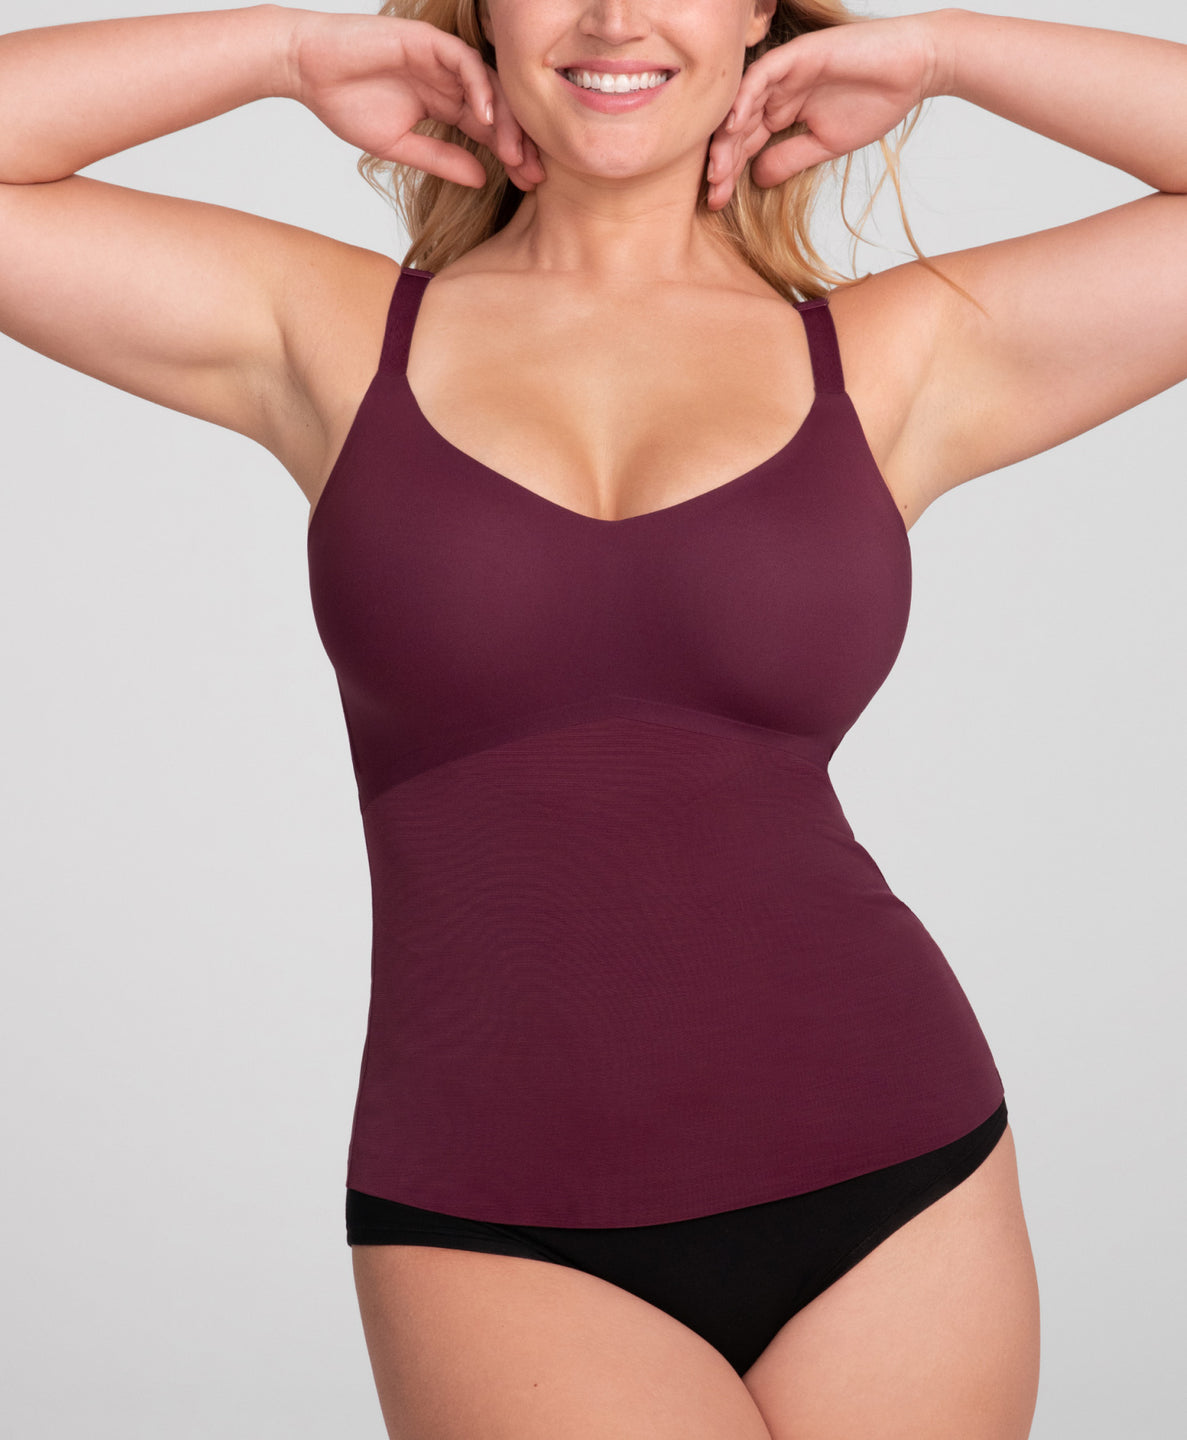 Honeylove - You asked, and we delivered! Meet our LiftWear Tank